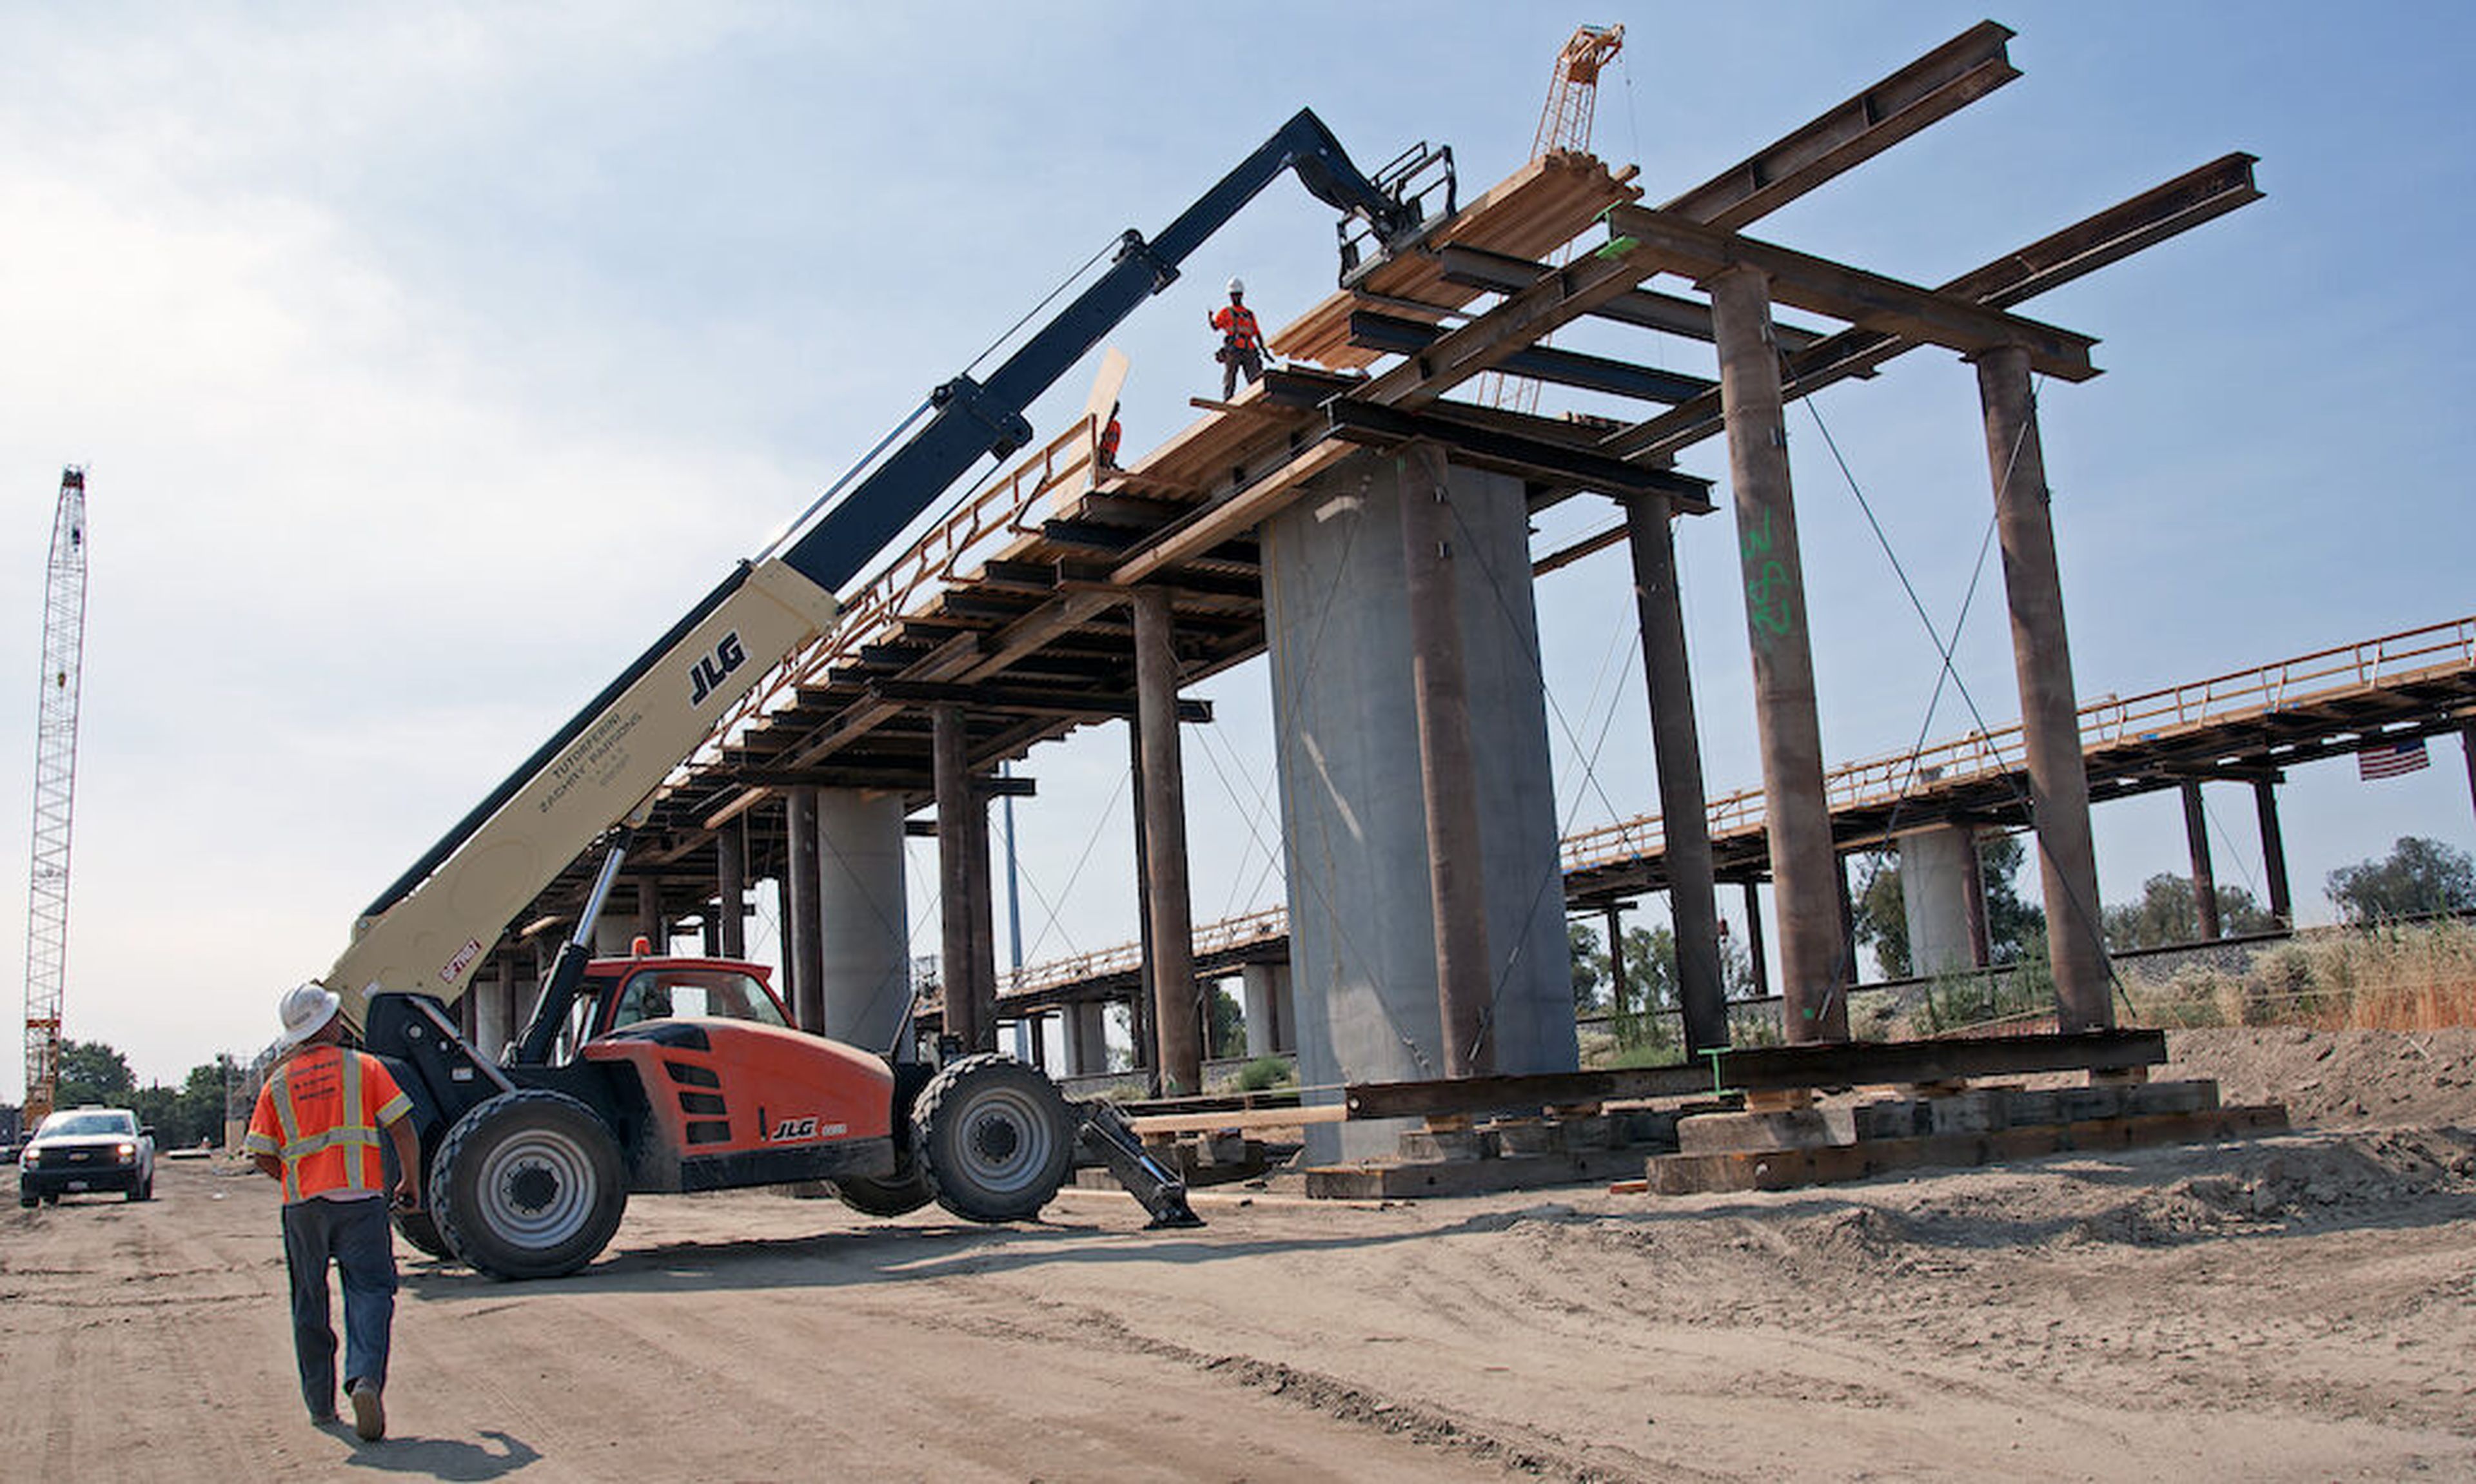 Construction of the San Joaquin River Viaduct in July 5, 2017, in Fresno, Calif. (Photo by California High-Speed Rail Authority via Getty Images)